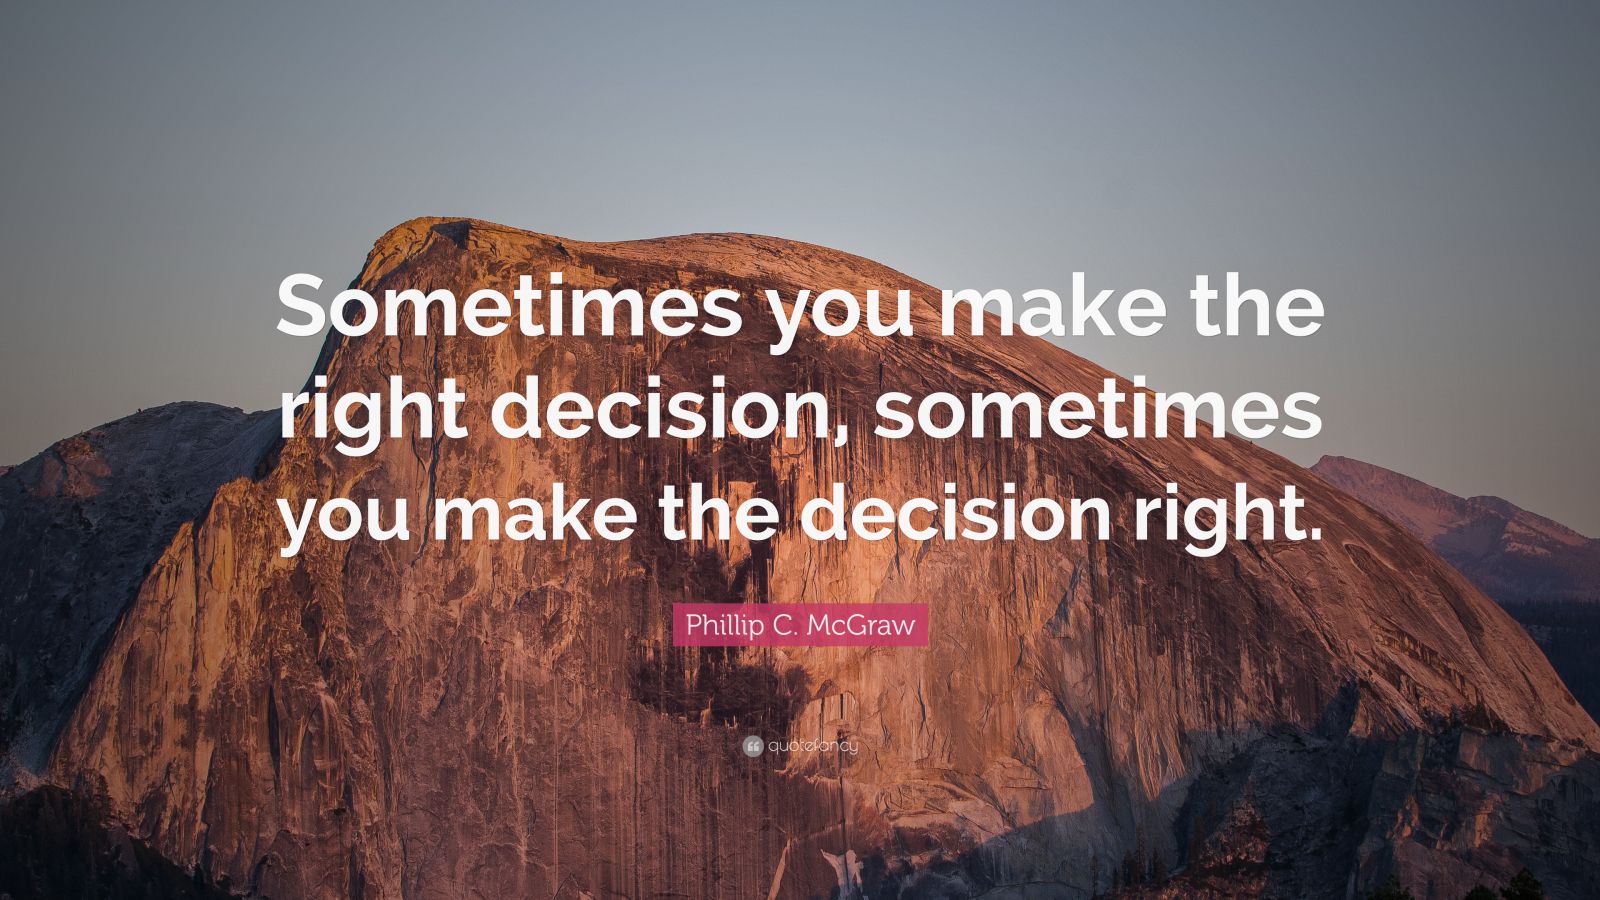 quotes about decisions tumblr